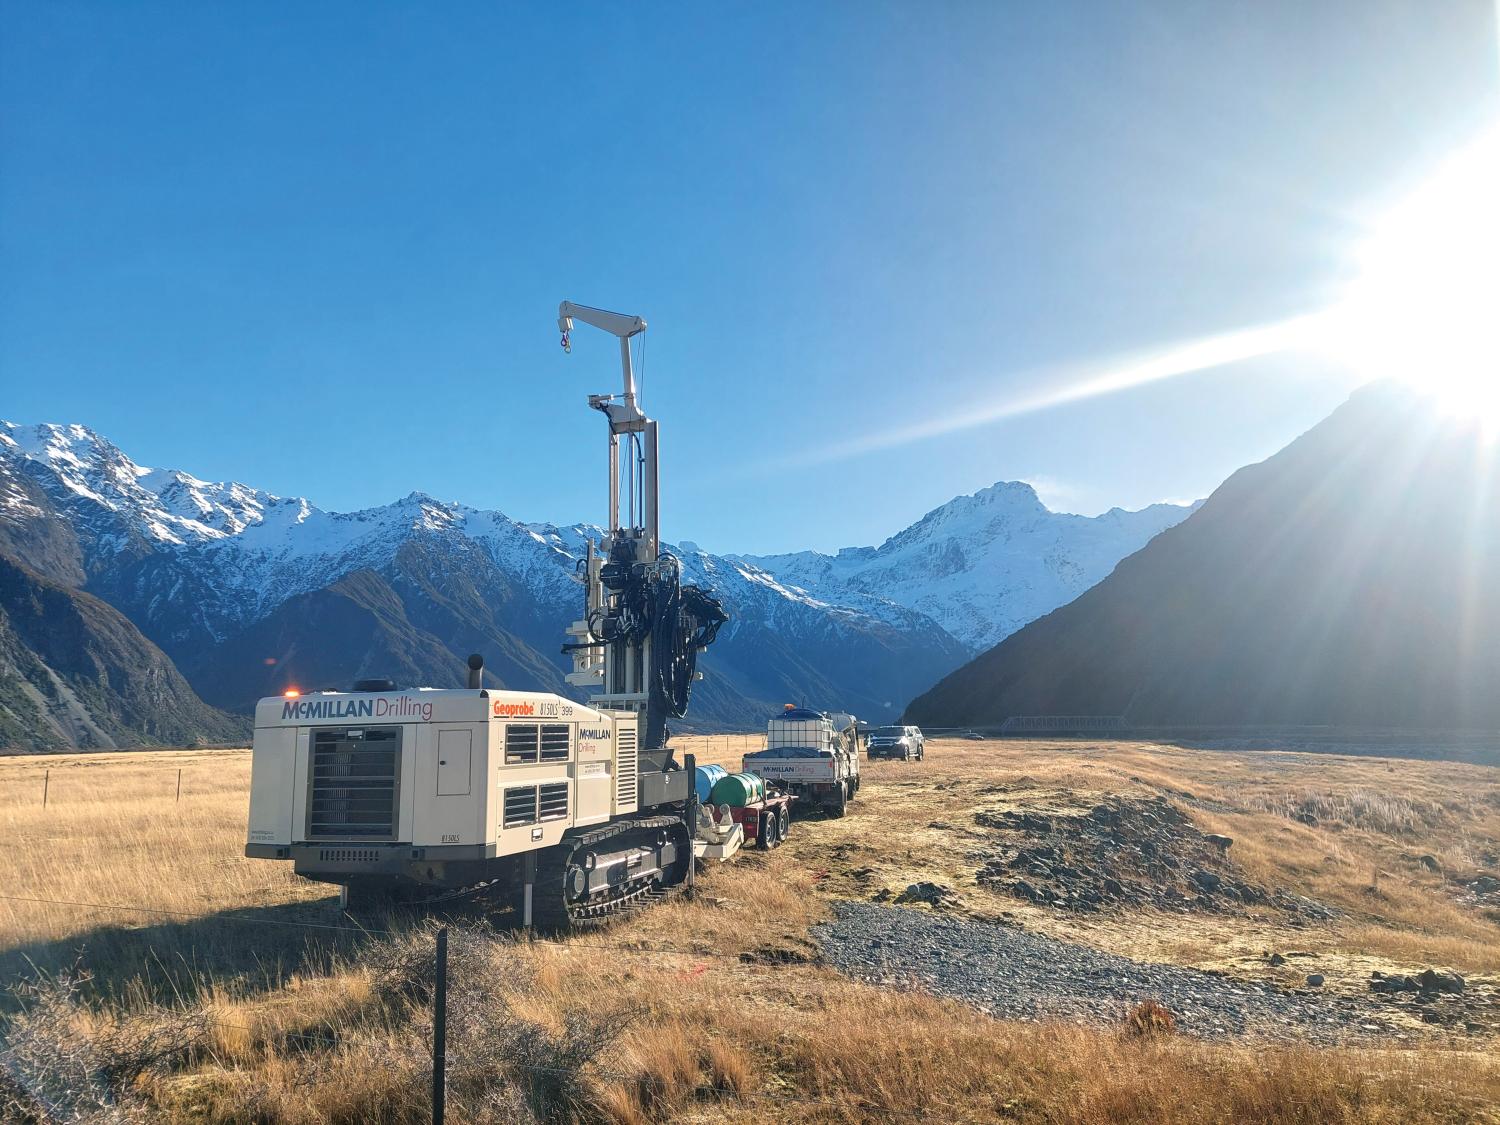 Capabilities of 8150LS sonic drilling machine are suited to a wider range of New Zealand sites like Mt. Cook.